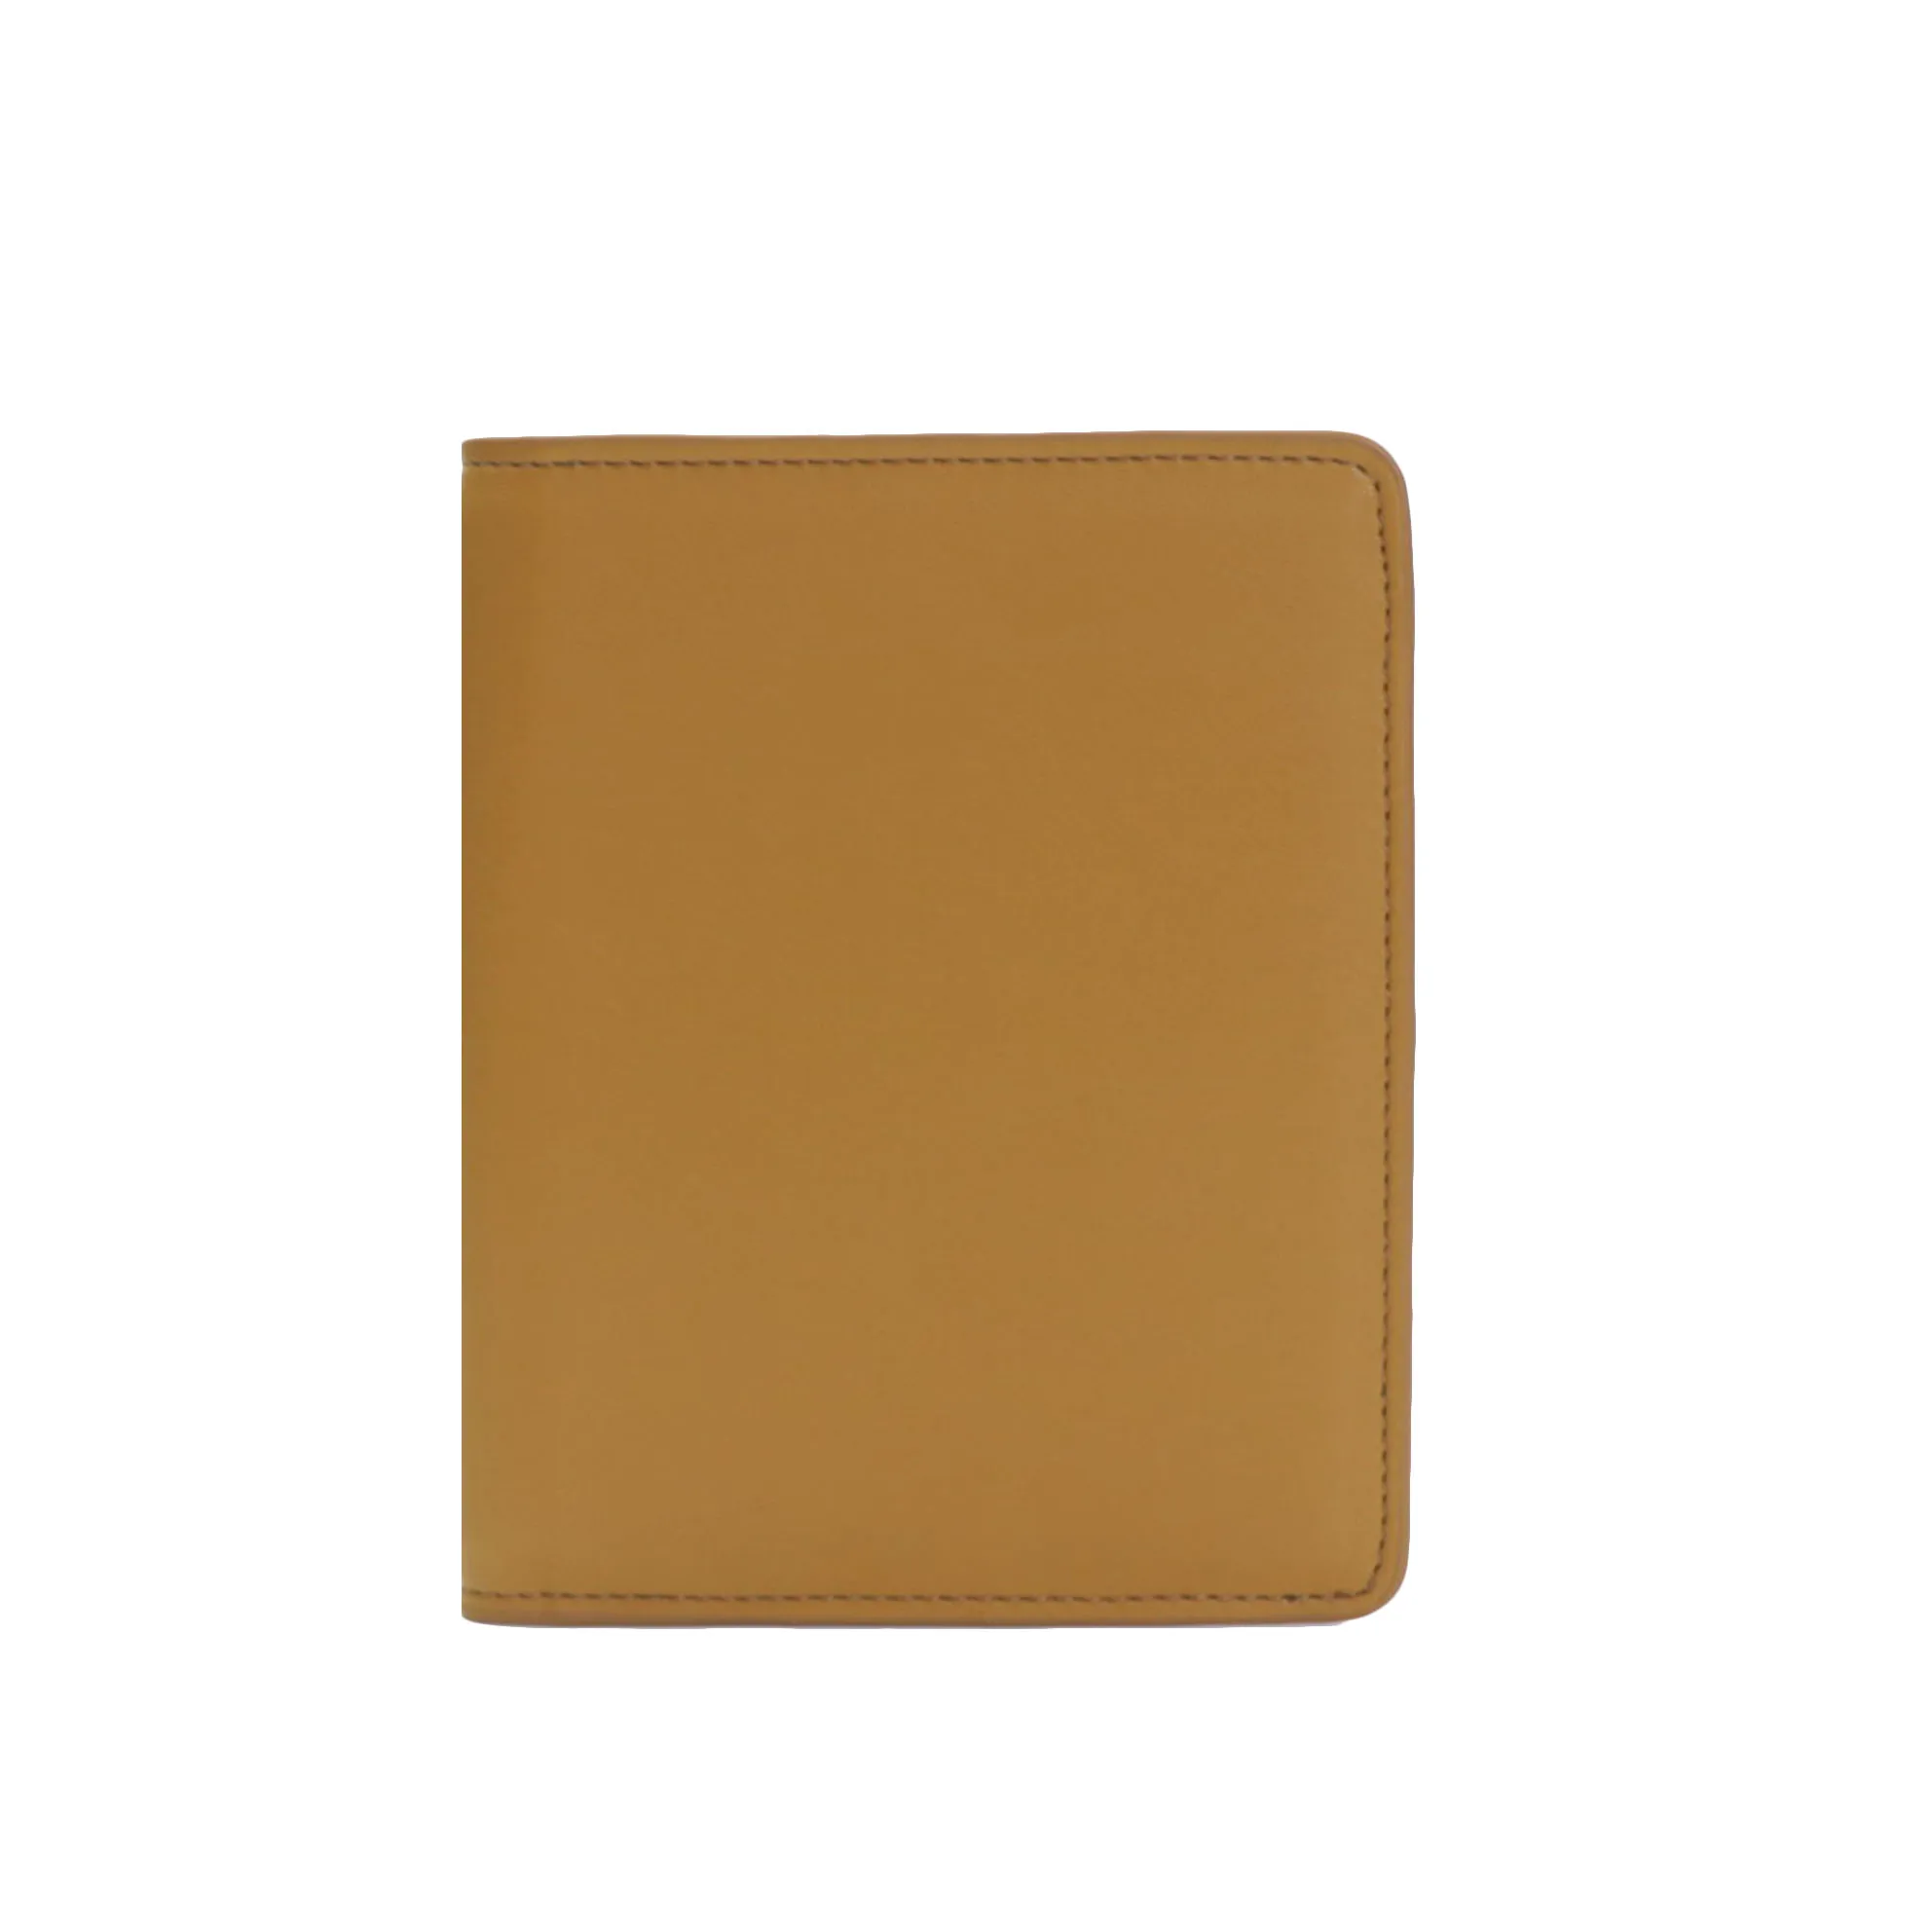 1pc Personalized Passport Holders: Add a Touch of Class to Your Travels  with Initial Letter PU Leather Holders